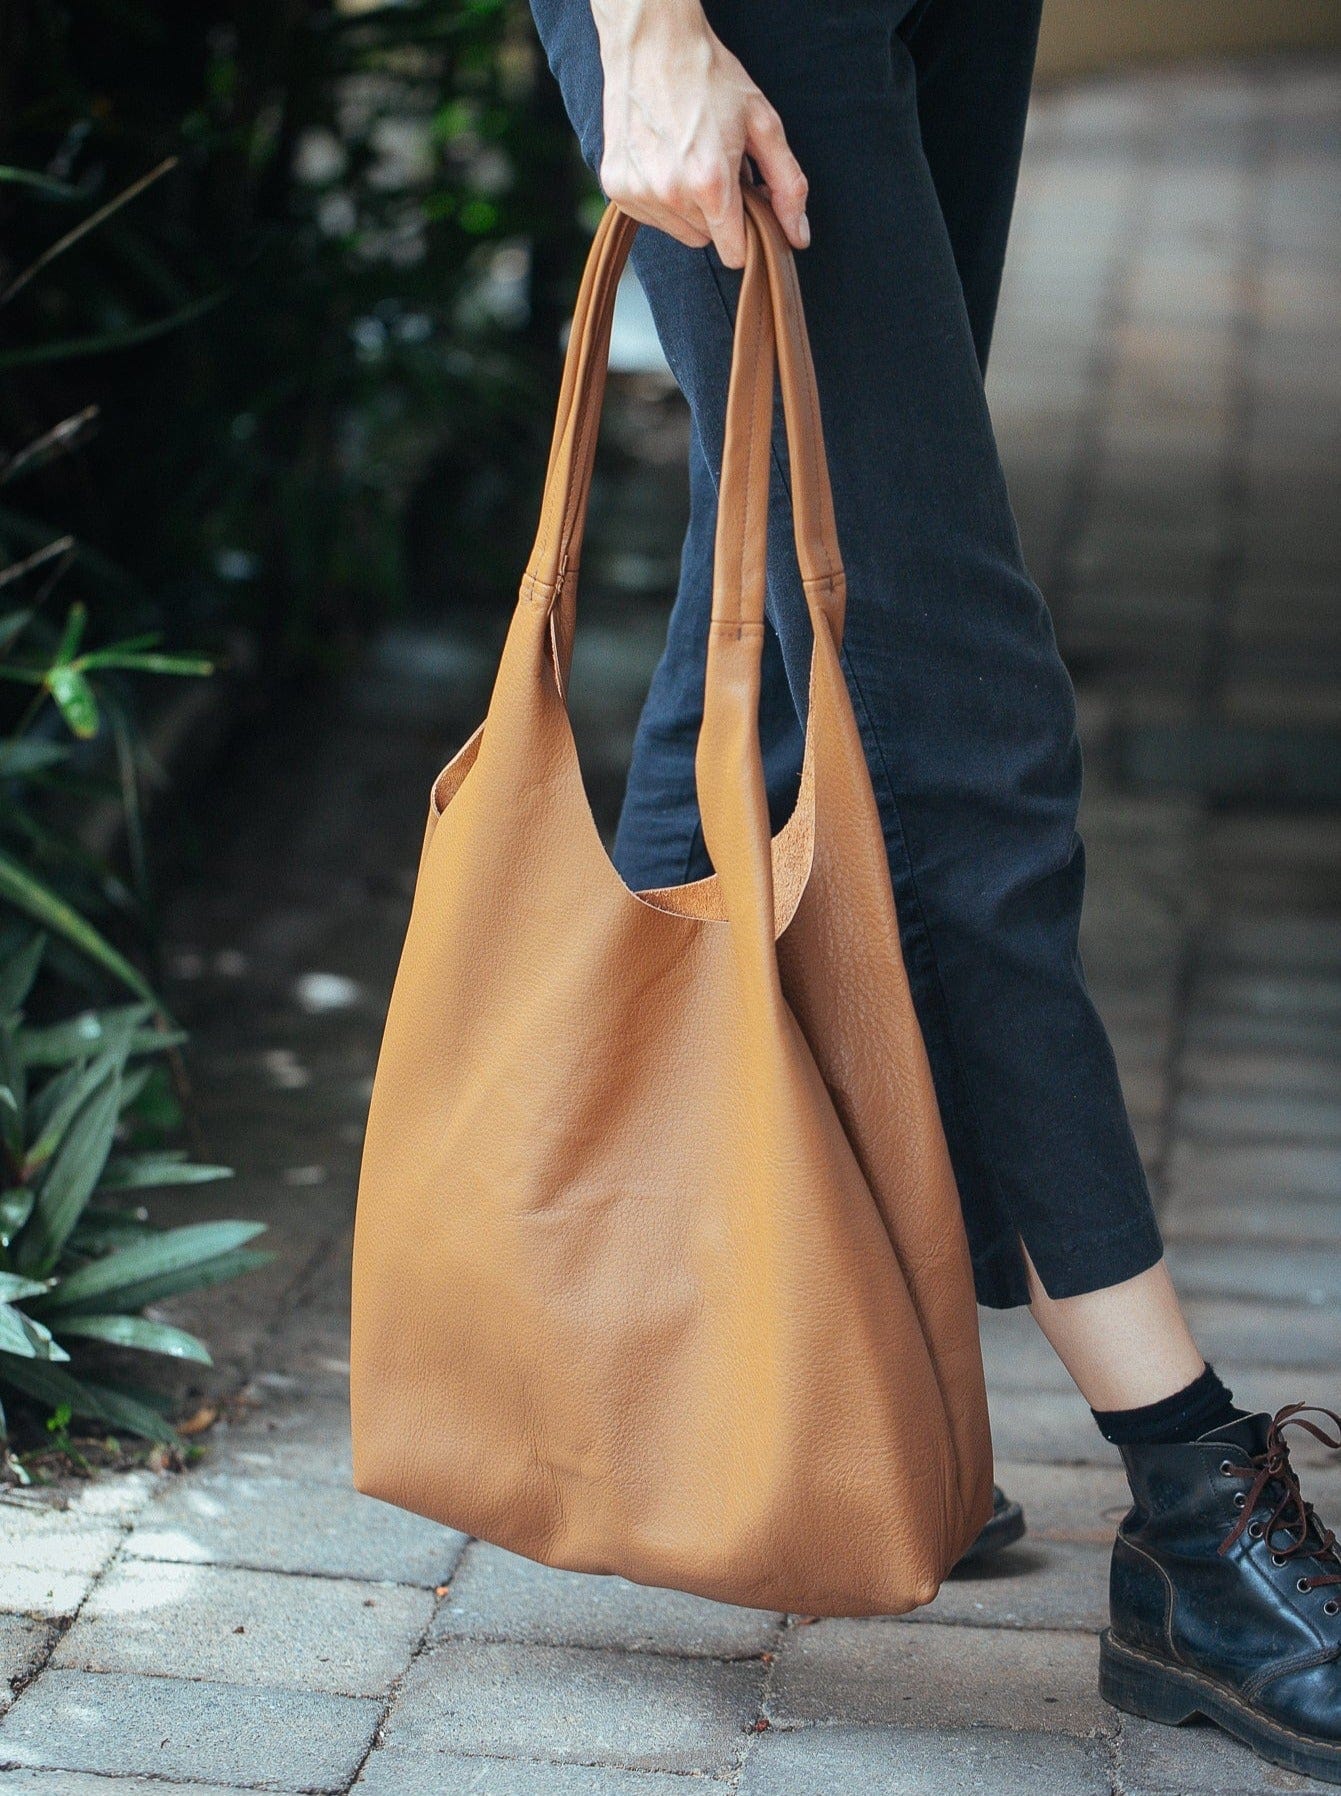 Broadwell Leather - Handmade Leather Bags In Wiltshire | Slouchy Tote